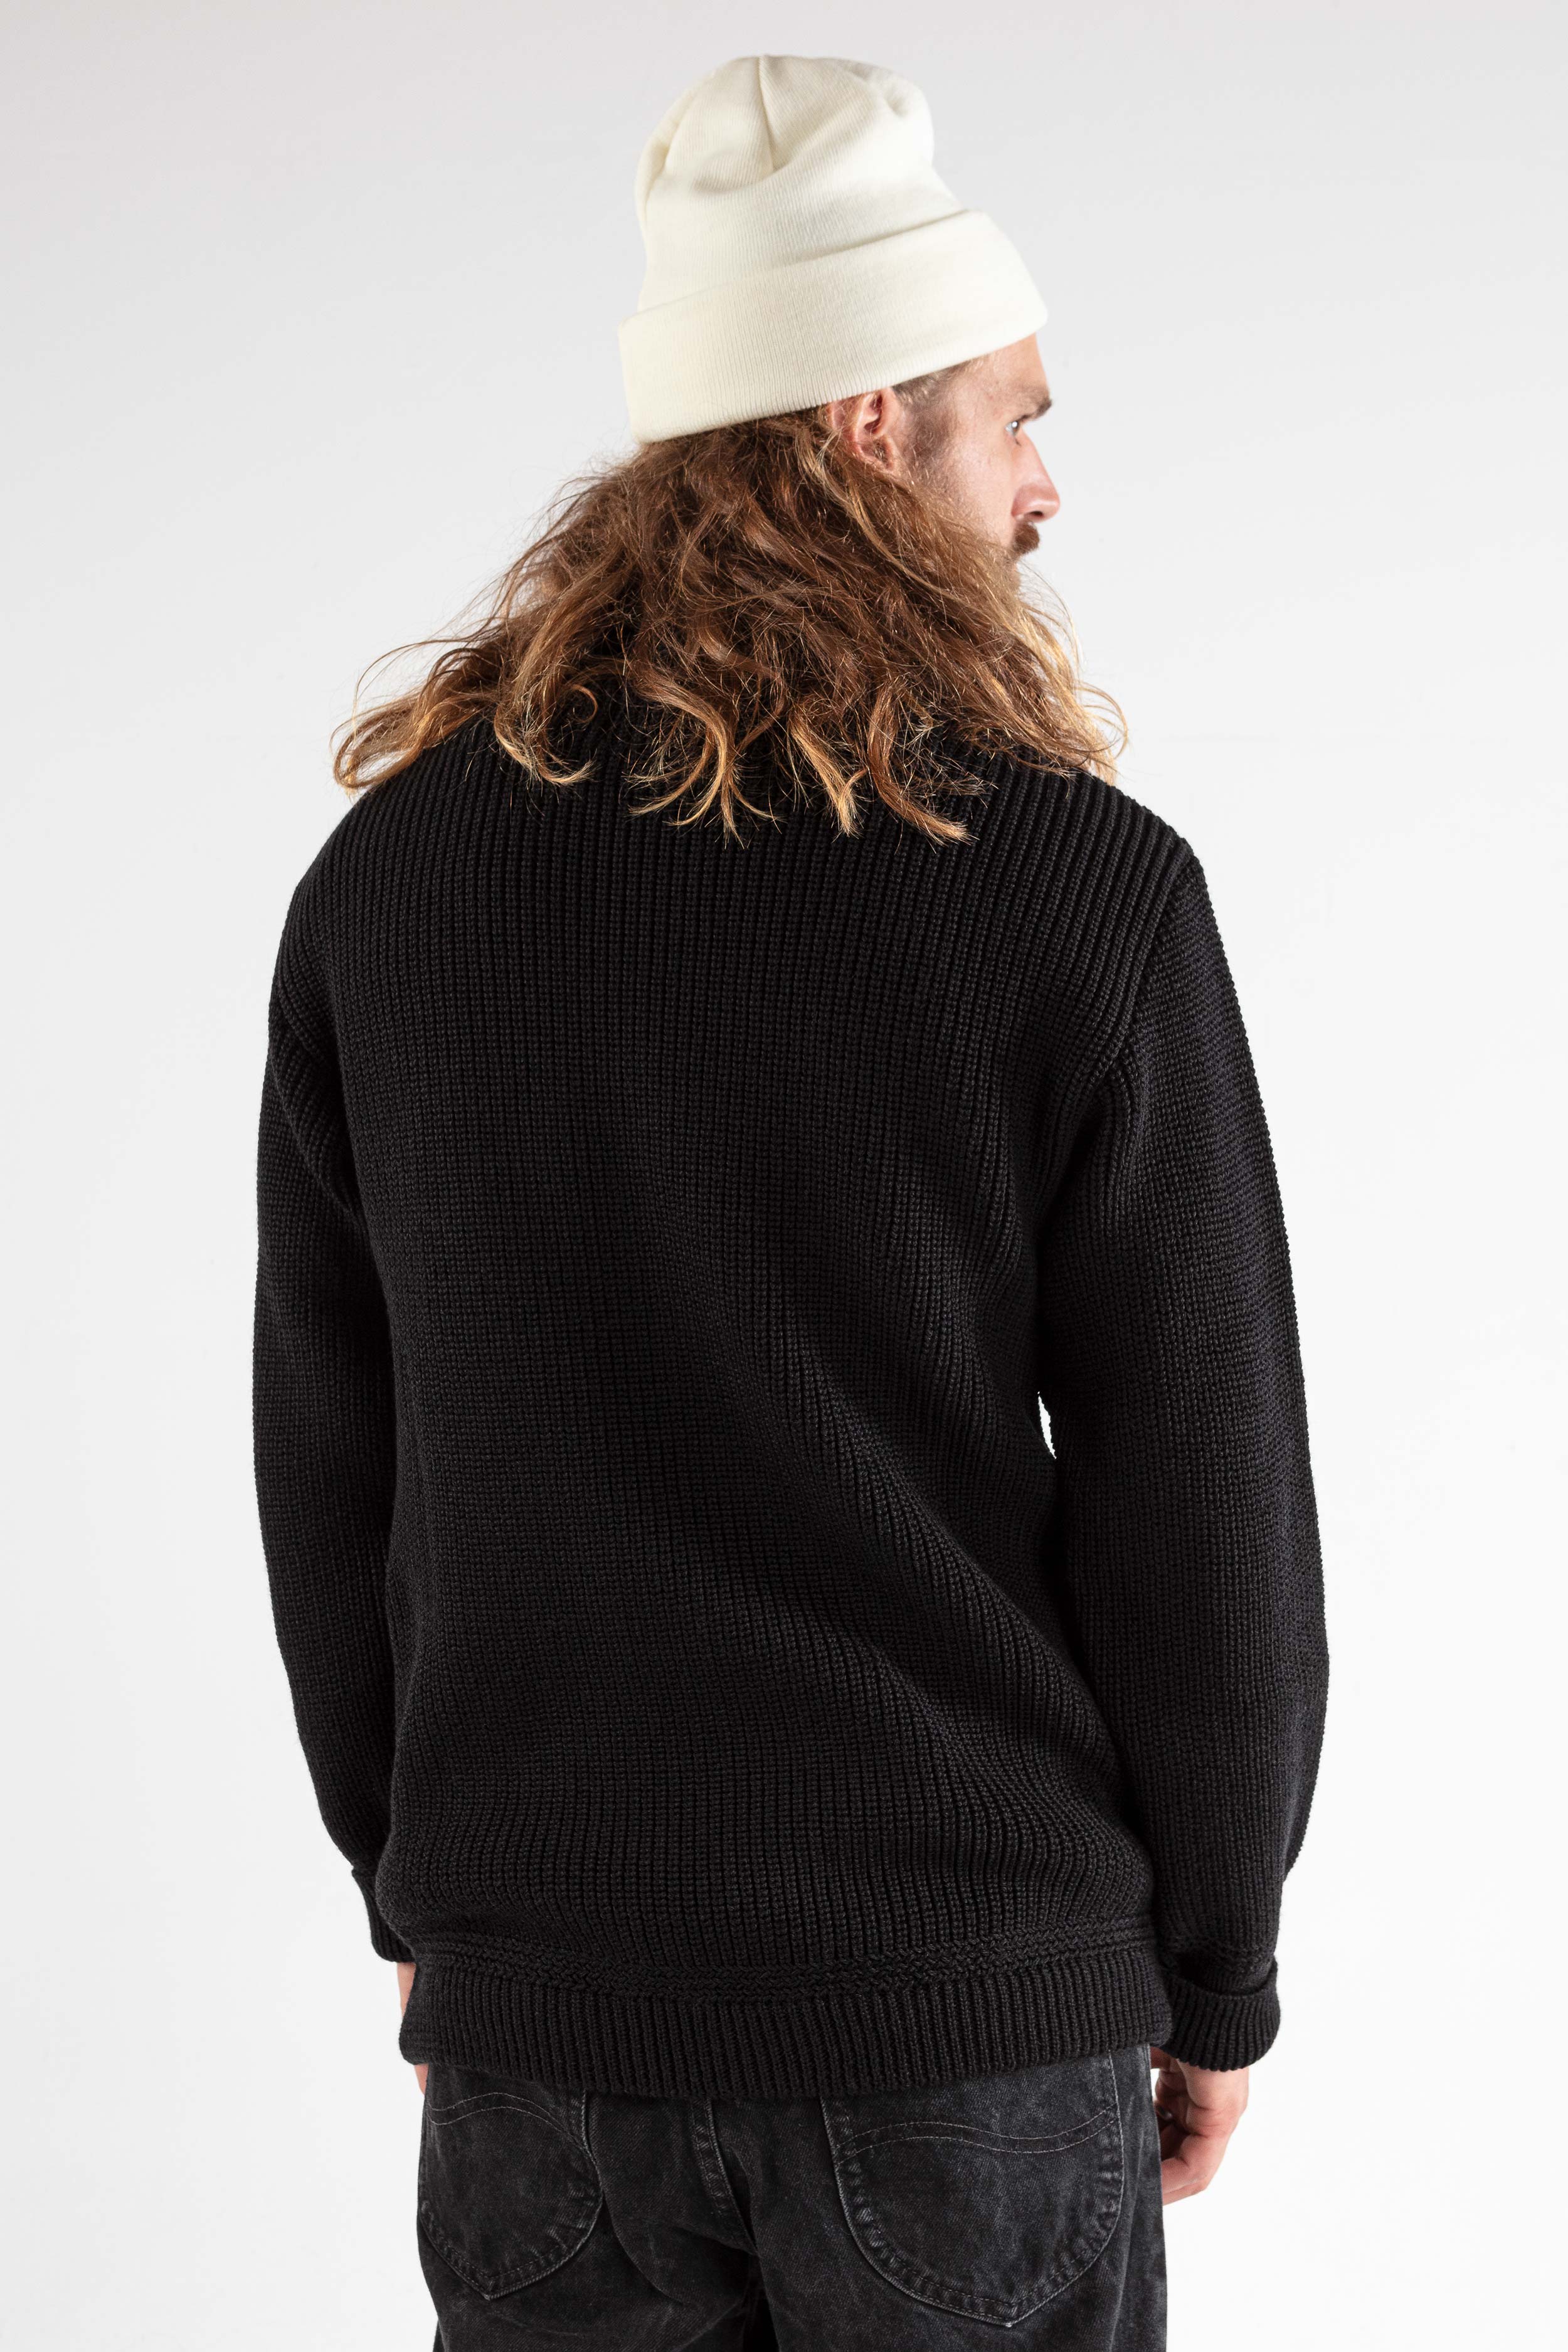 JECKYBENG-The-MERINO-TROYER black